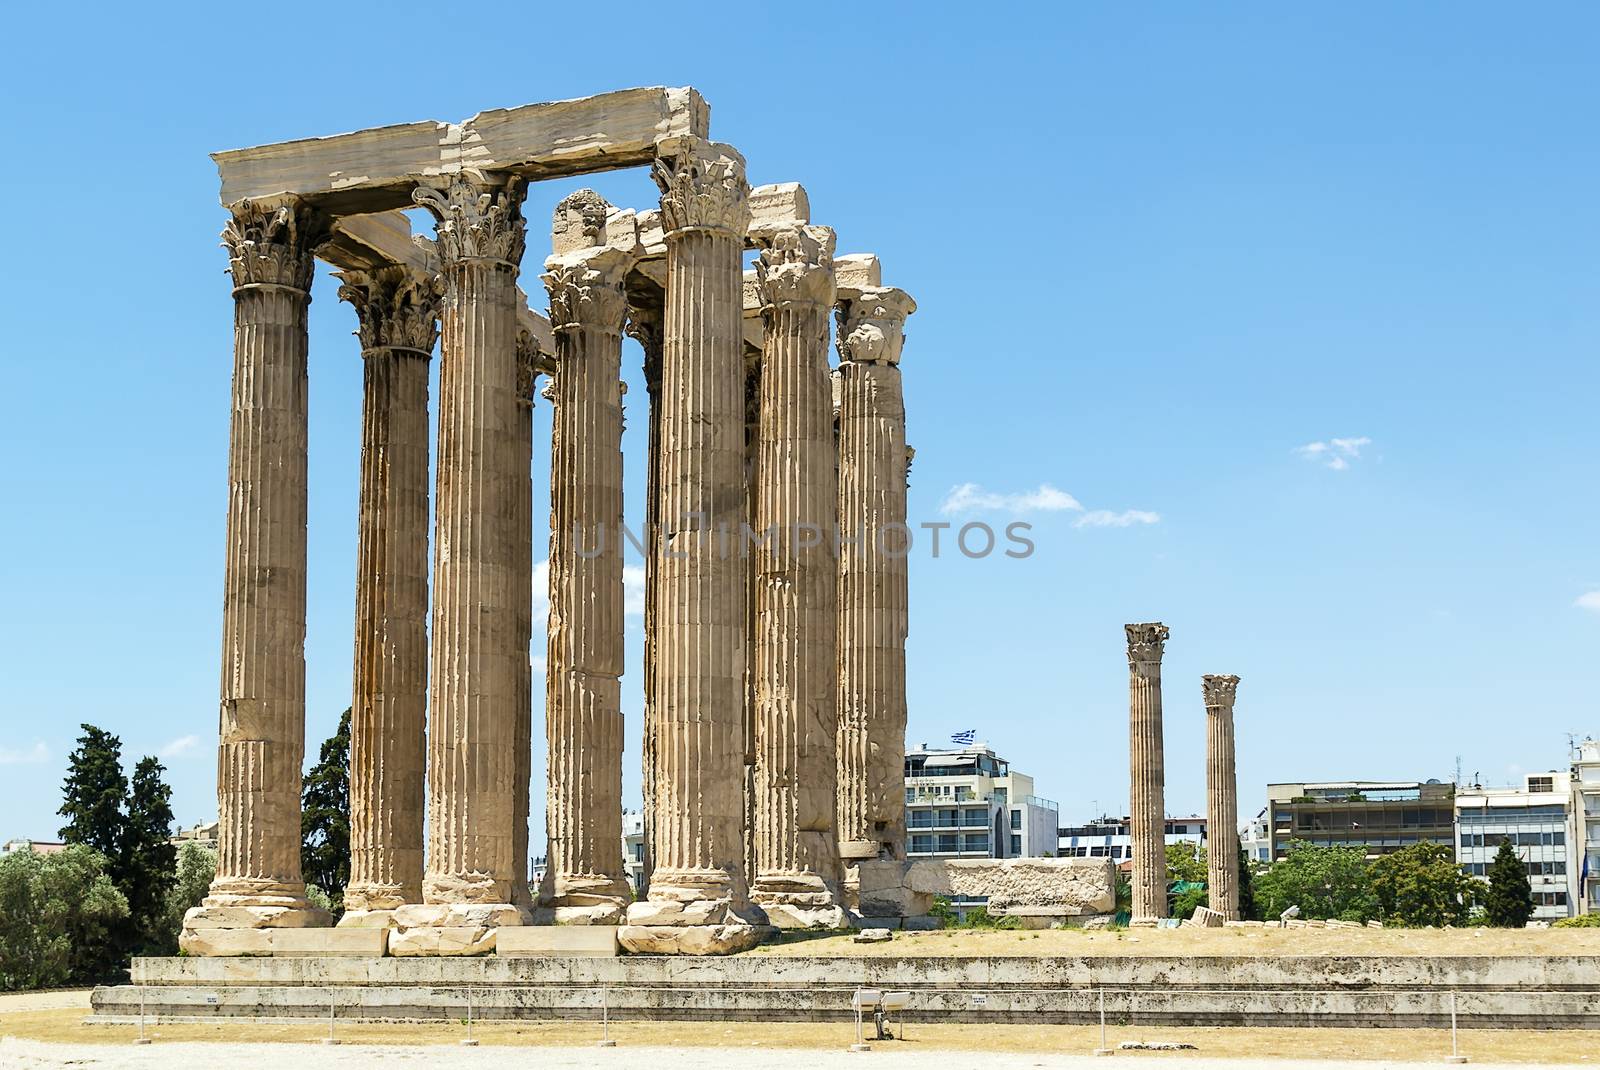 The Temple of Olympian Zeus is a colossal ruined temple in the centre of the Greek capital Athens that was dedicated to Zeus